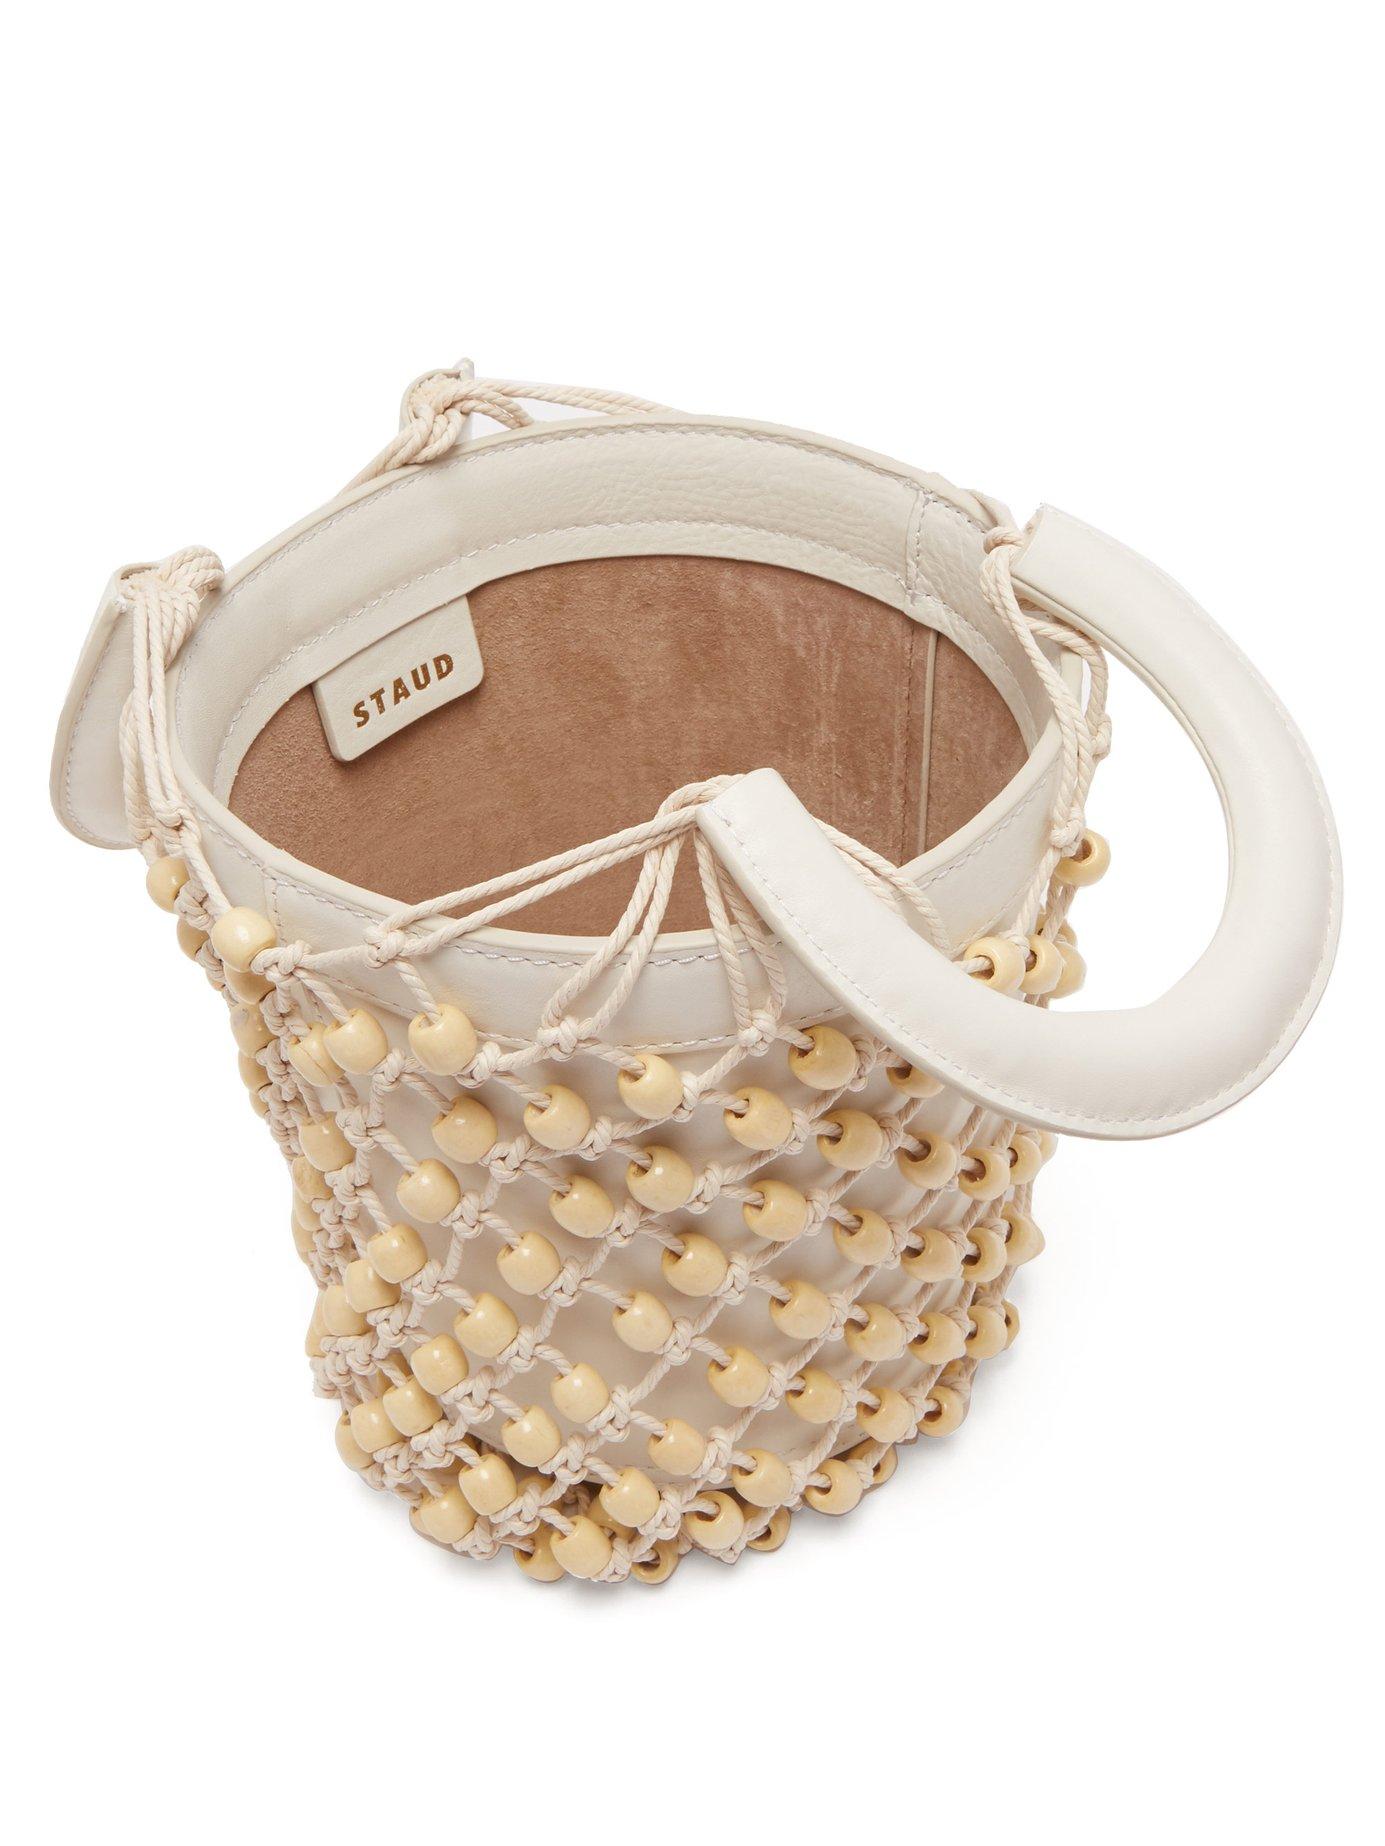 STAUD Moreau Macramé And Leather Bucket Bag in White - Lyst